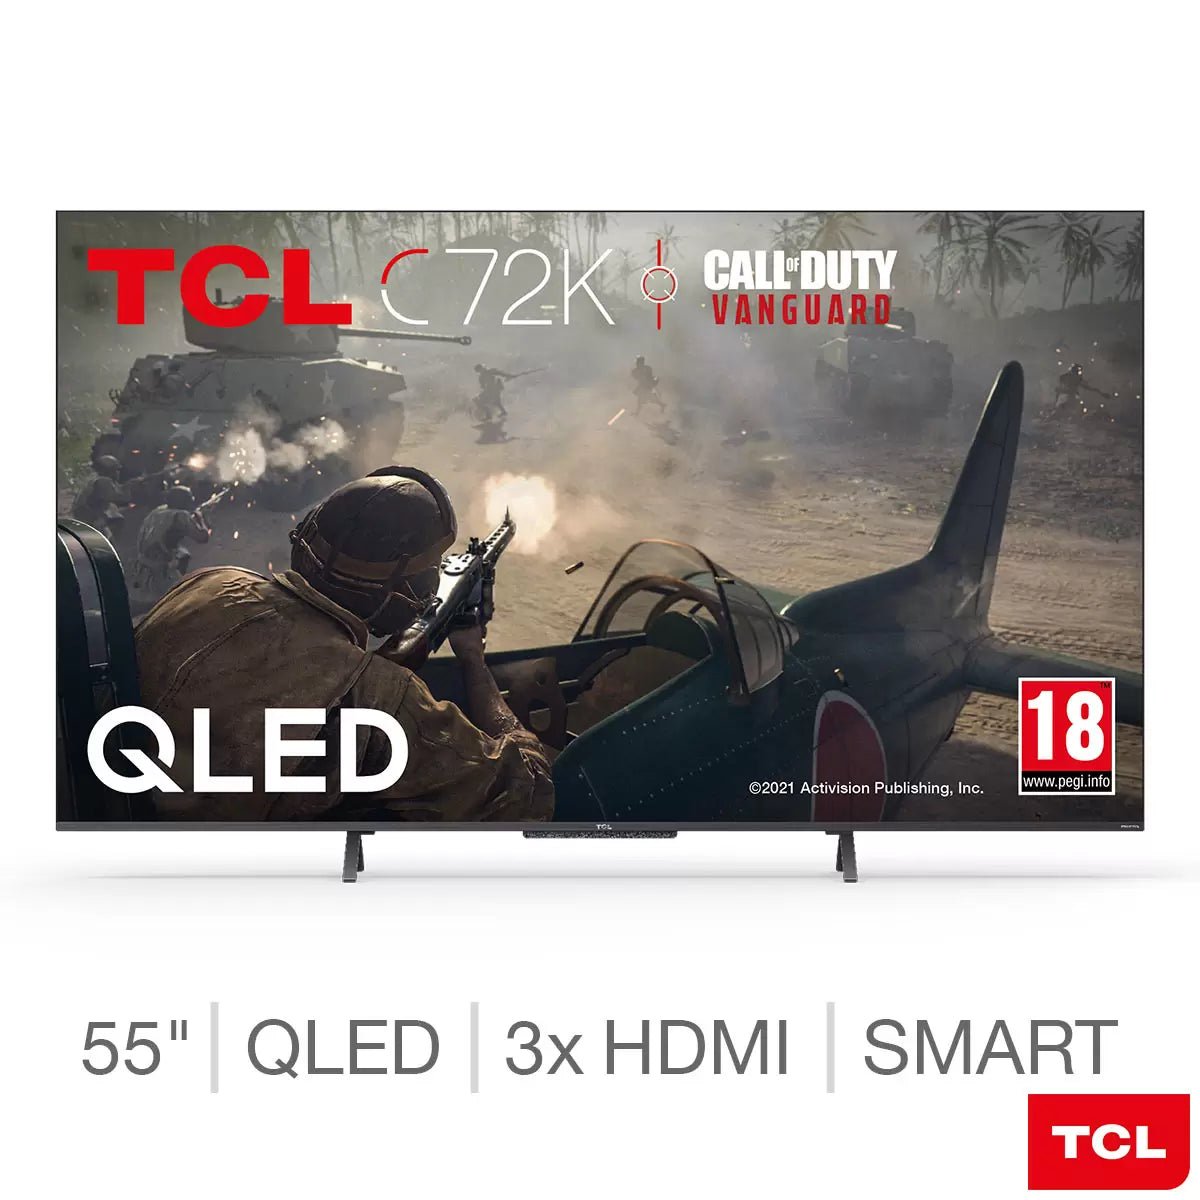 TCL 55C720K 55 Inch QLED 4K Ultra HD Smart Android TV - KTechWorld